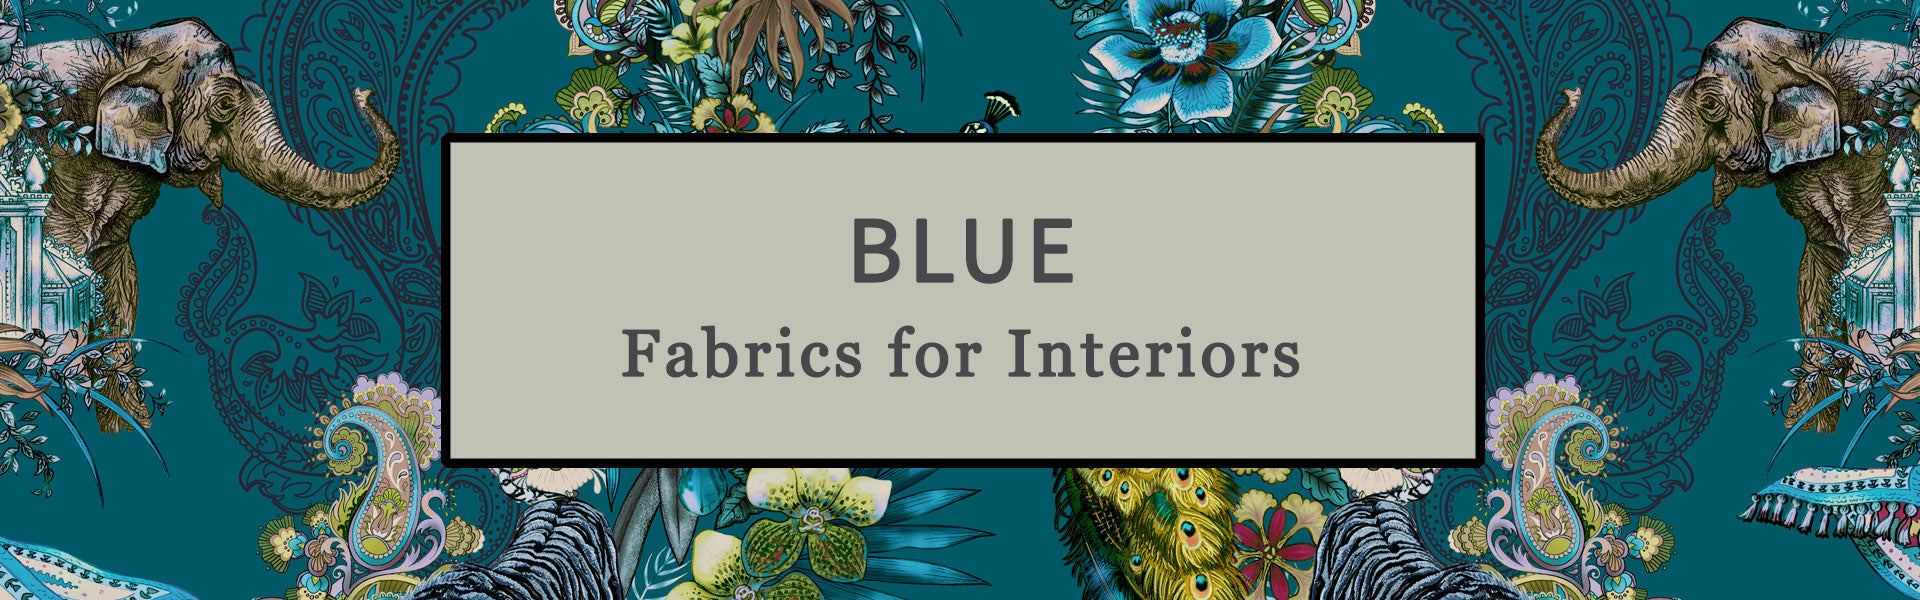 Blue Fabric for Interiors, Upholstery, Curtains and Soft Furnishings by Designer, Becca Who